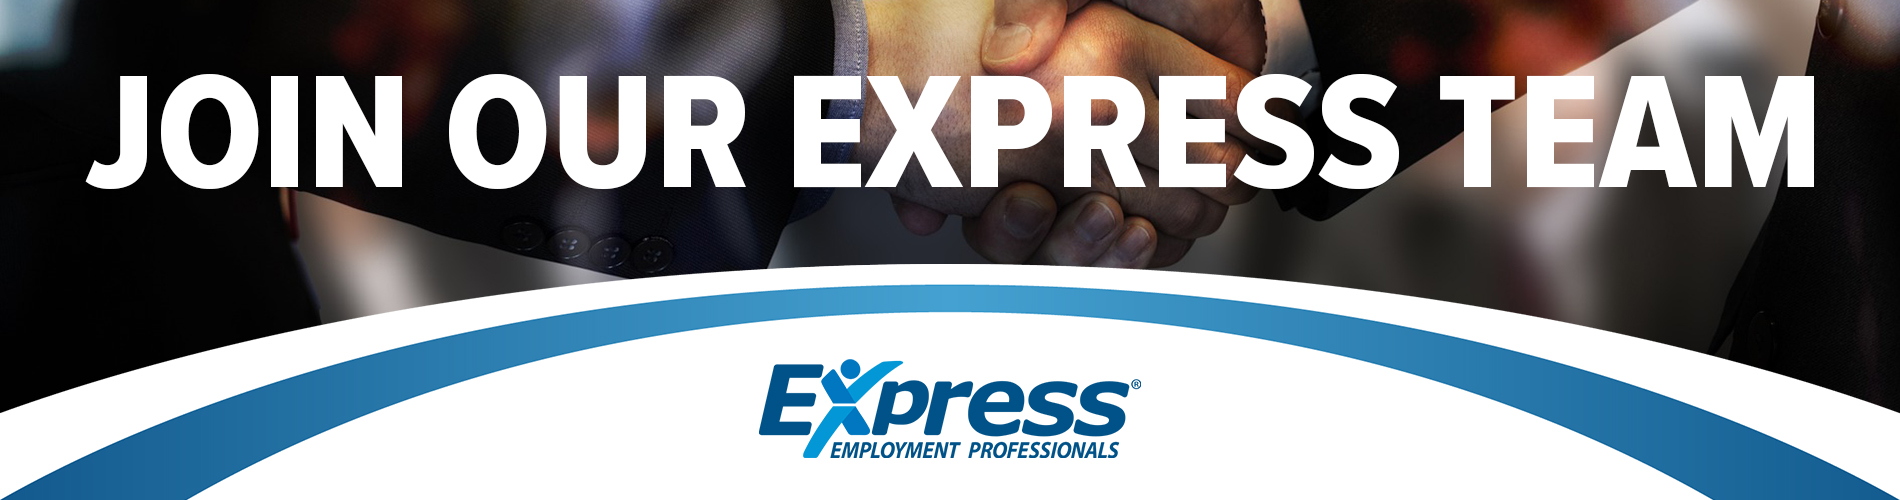 Join Our Express Team, Staffing and Recruiting Jobs Near Me